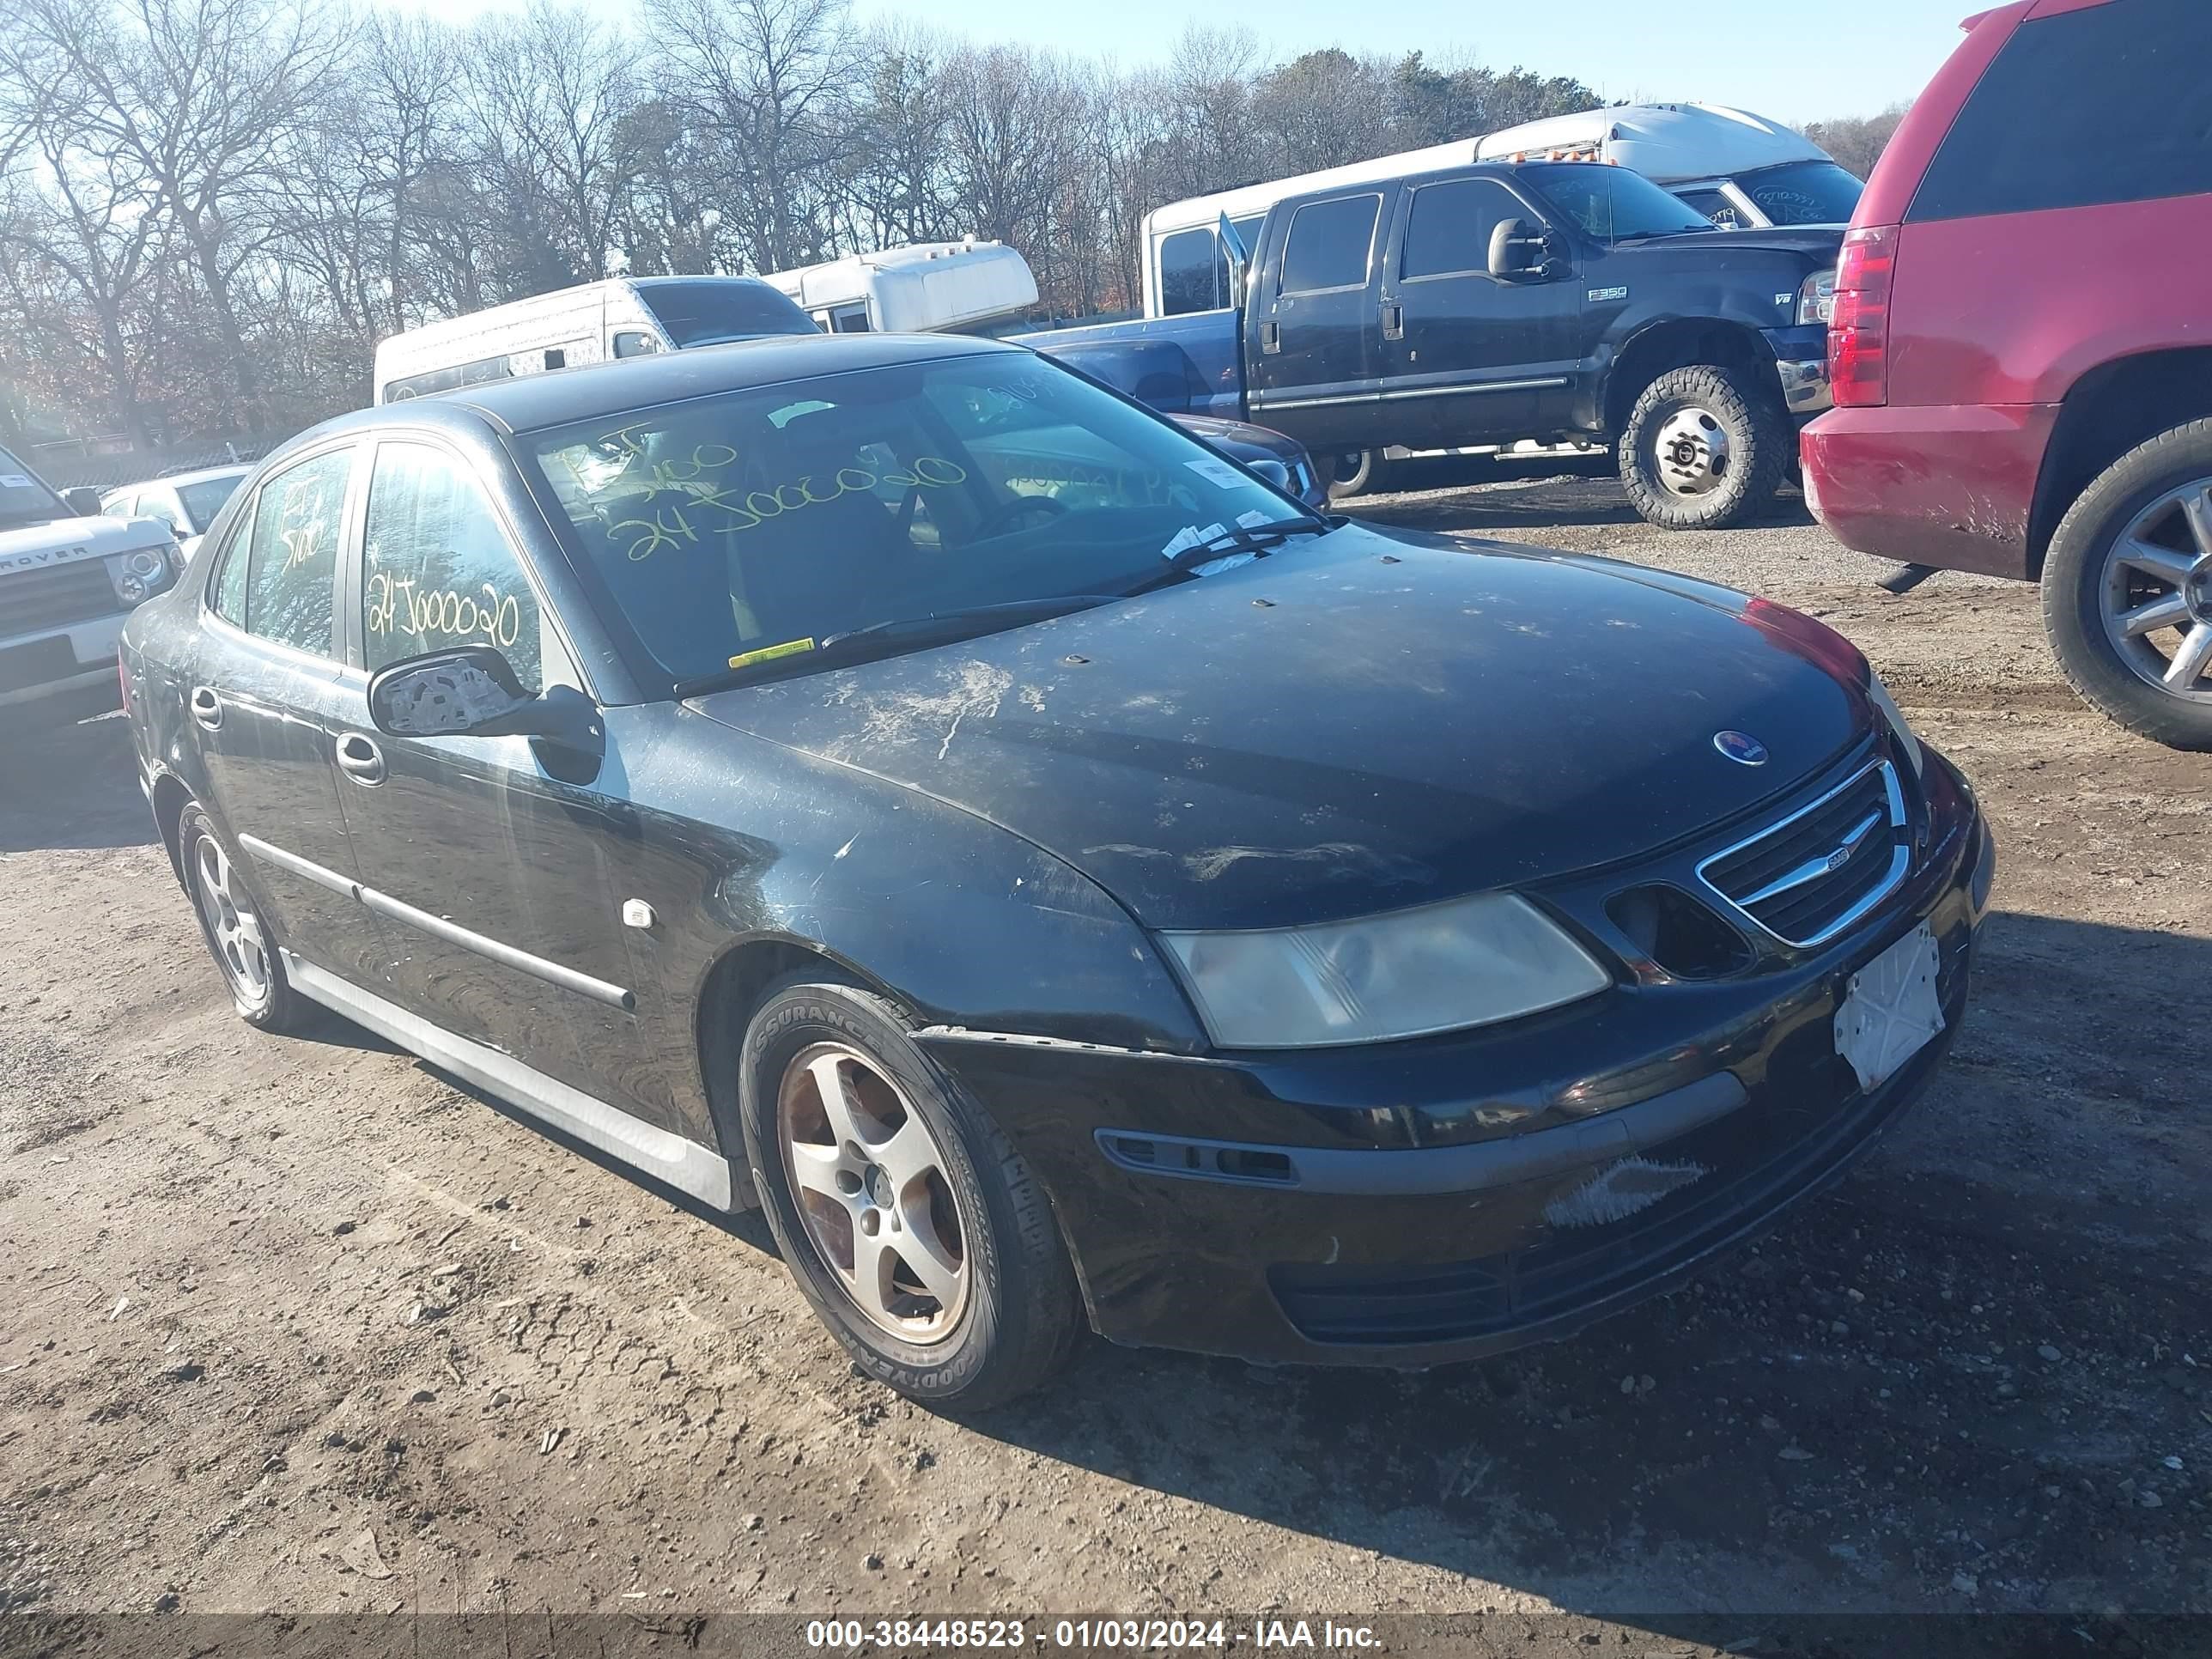 vin: YS3FB49S141010559 YS3FB49S141010559 2004 saab 9-3 2000 for Sale in 11763, 156 Peconic Ave, Medford, USA